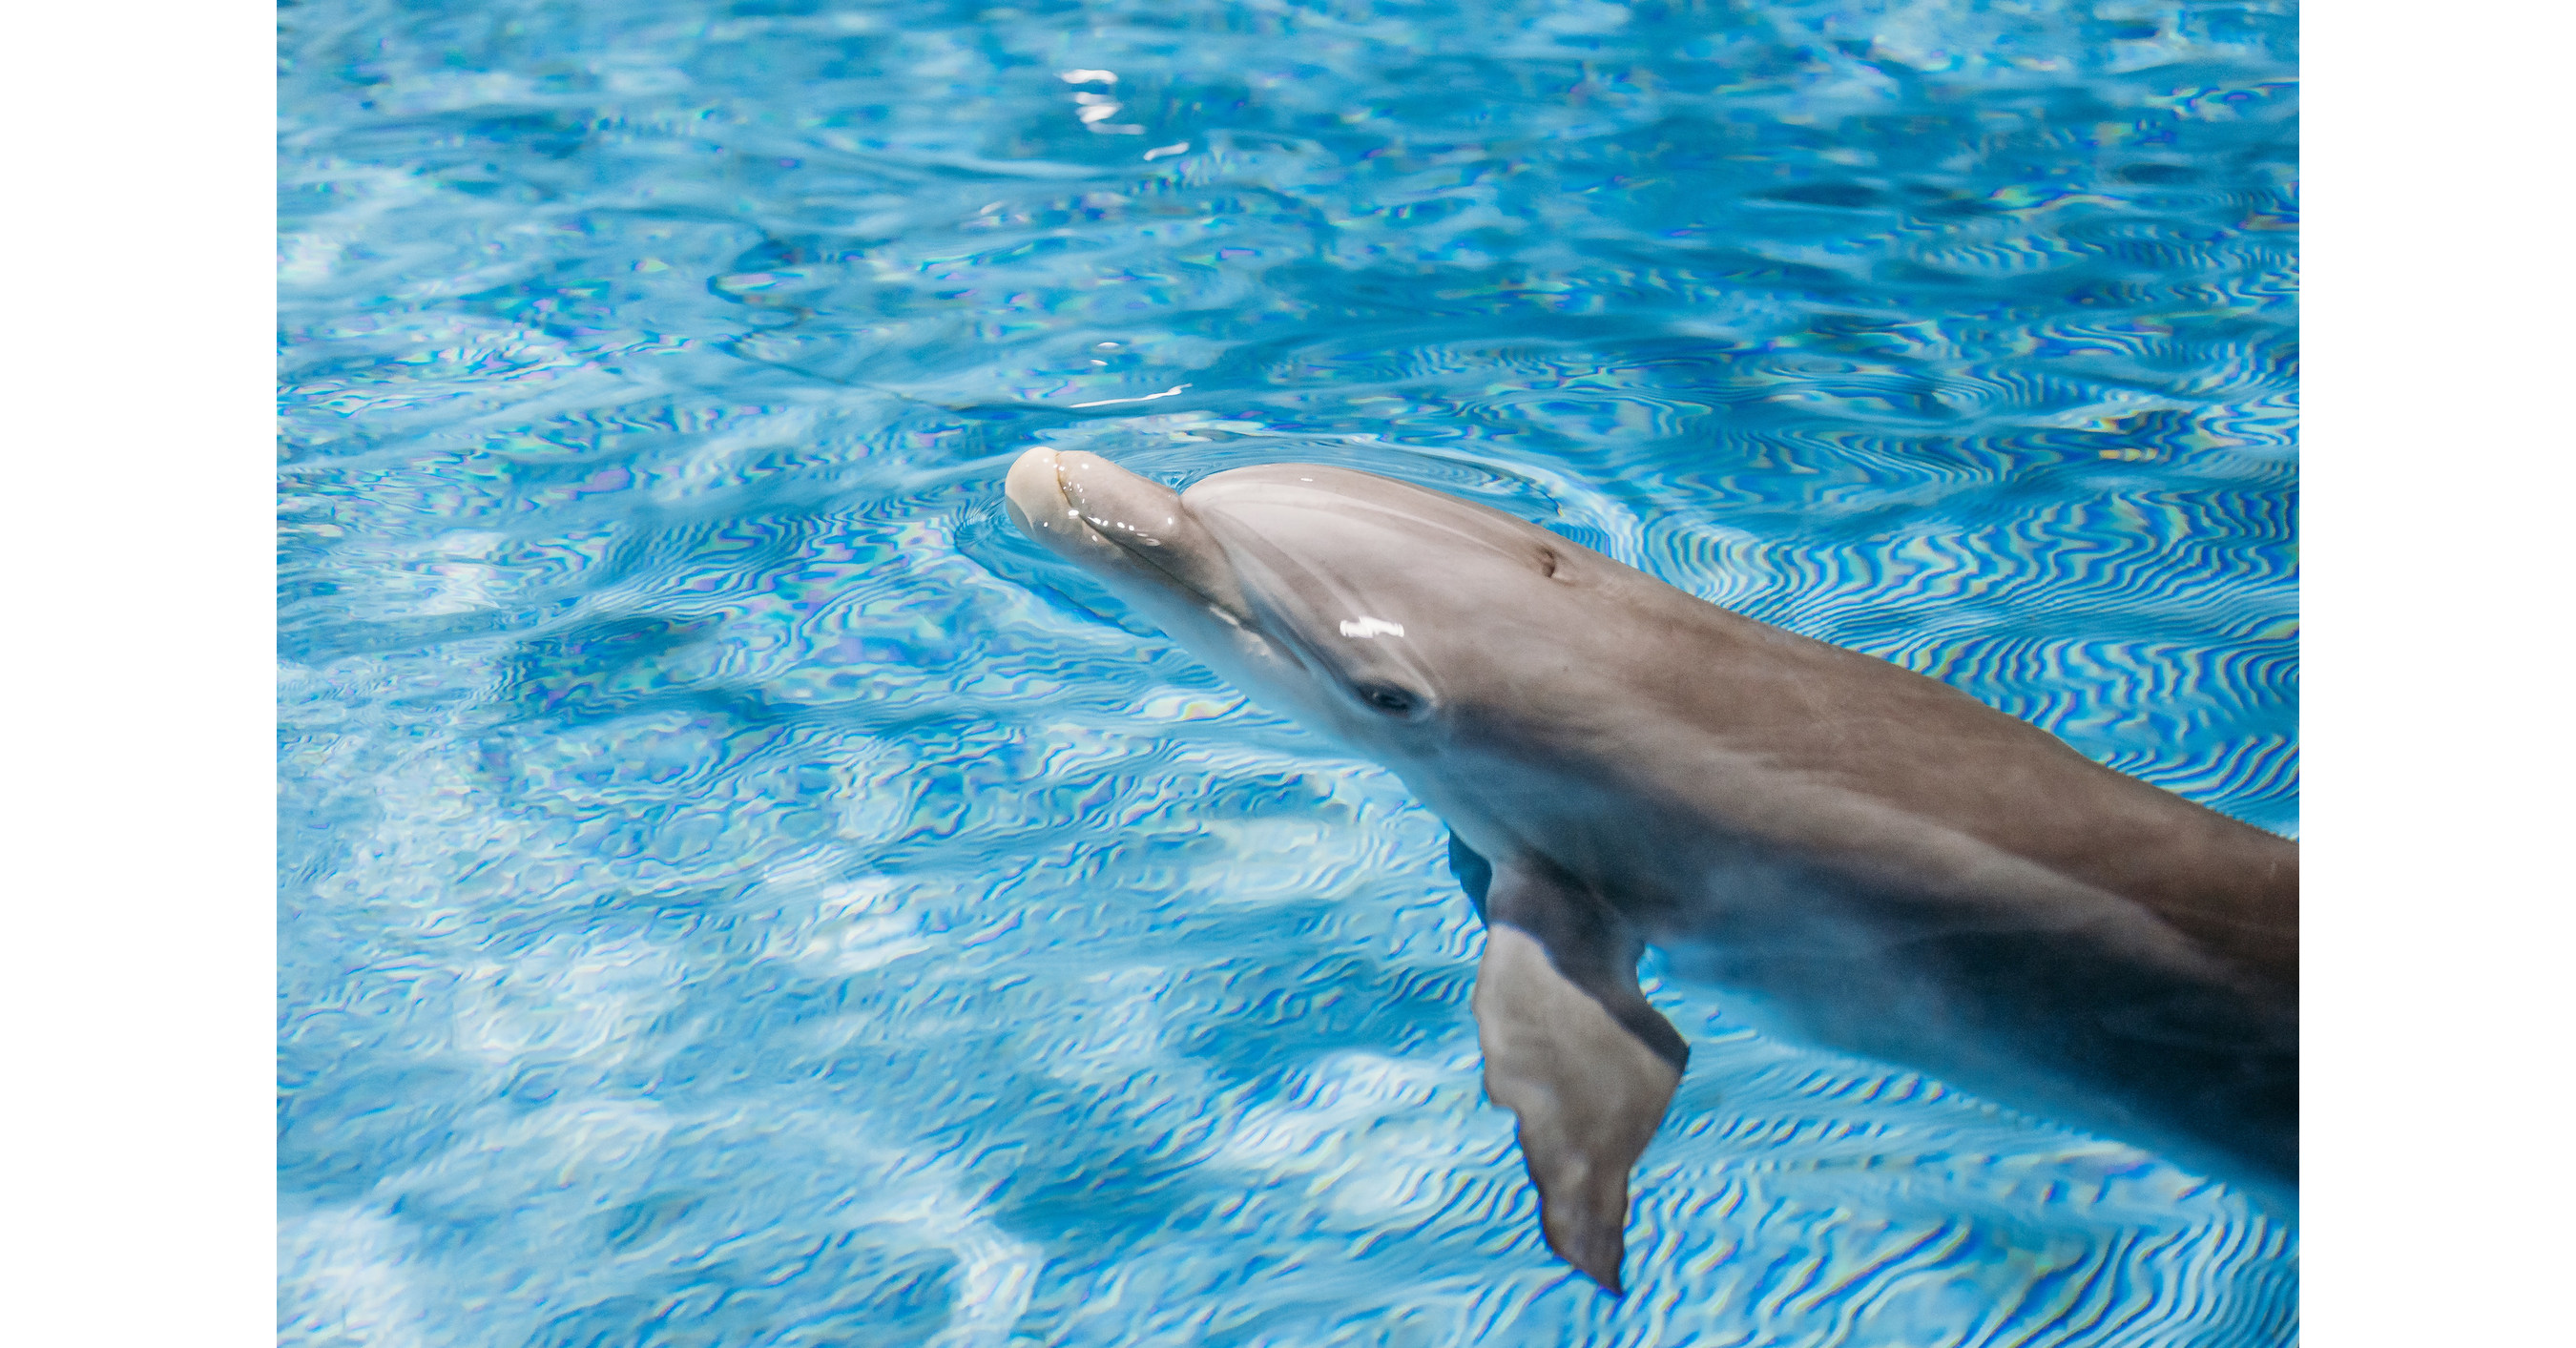 Clearwater Marine Aquarium Welcomes New Rescued Resident Dolphin